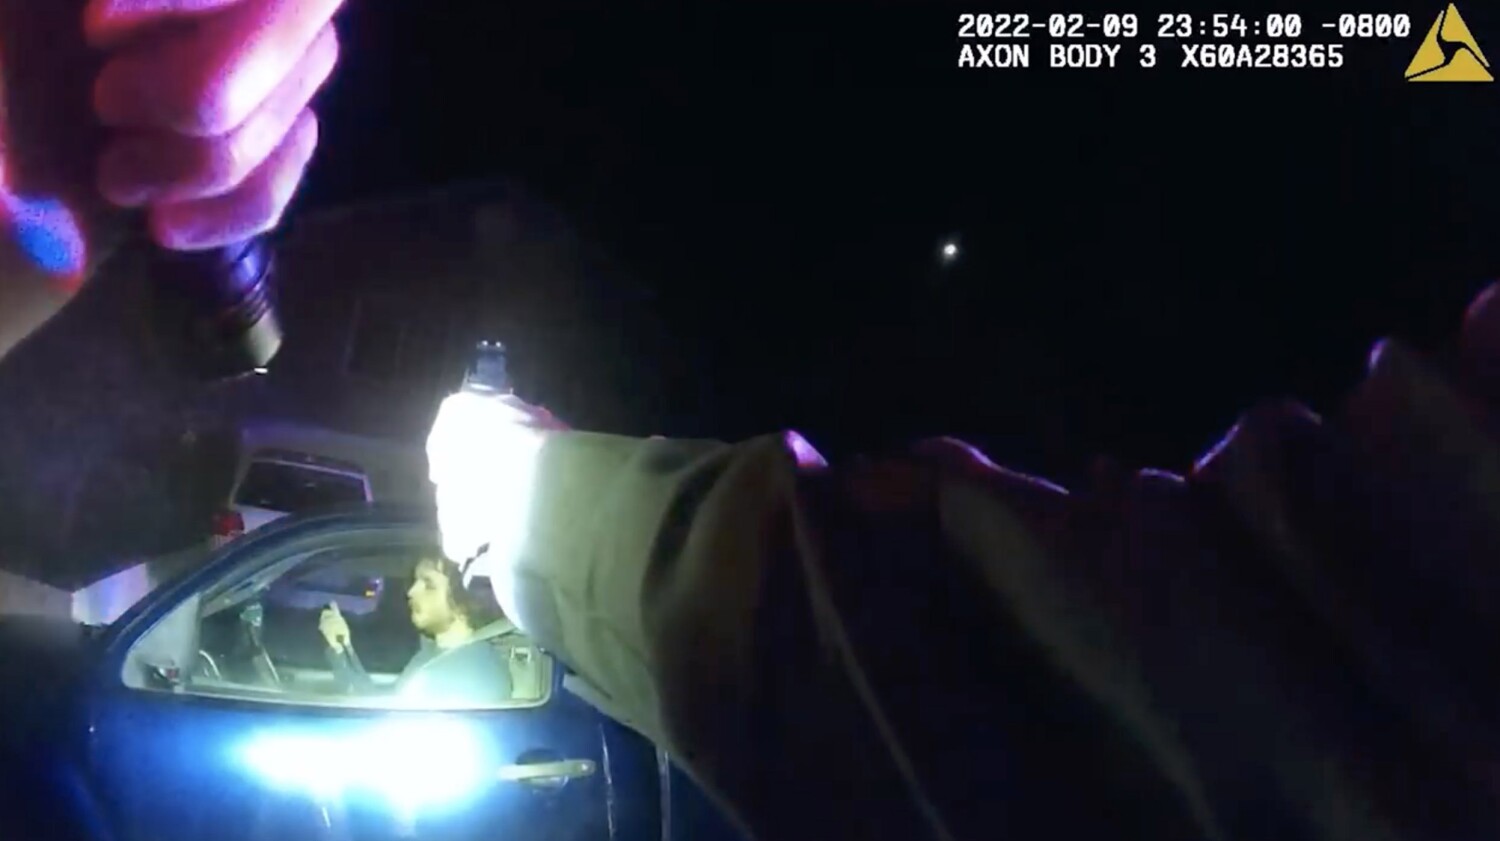 Video shows Orange County sheriff's deputies fatally shooting man armed with a knife